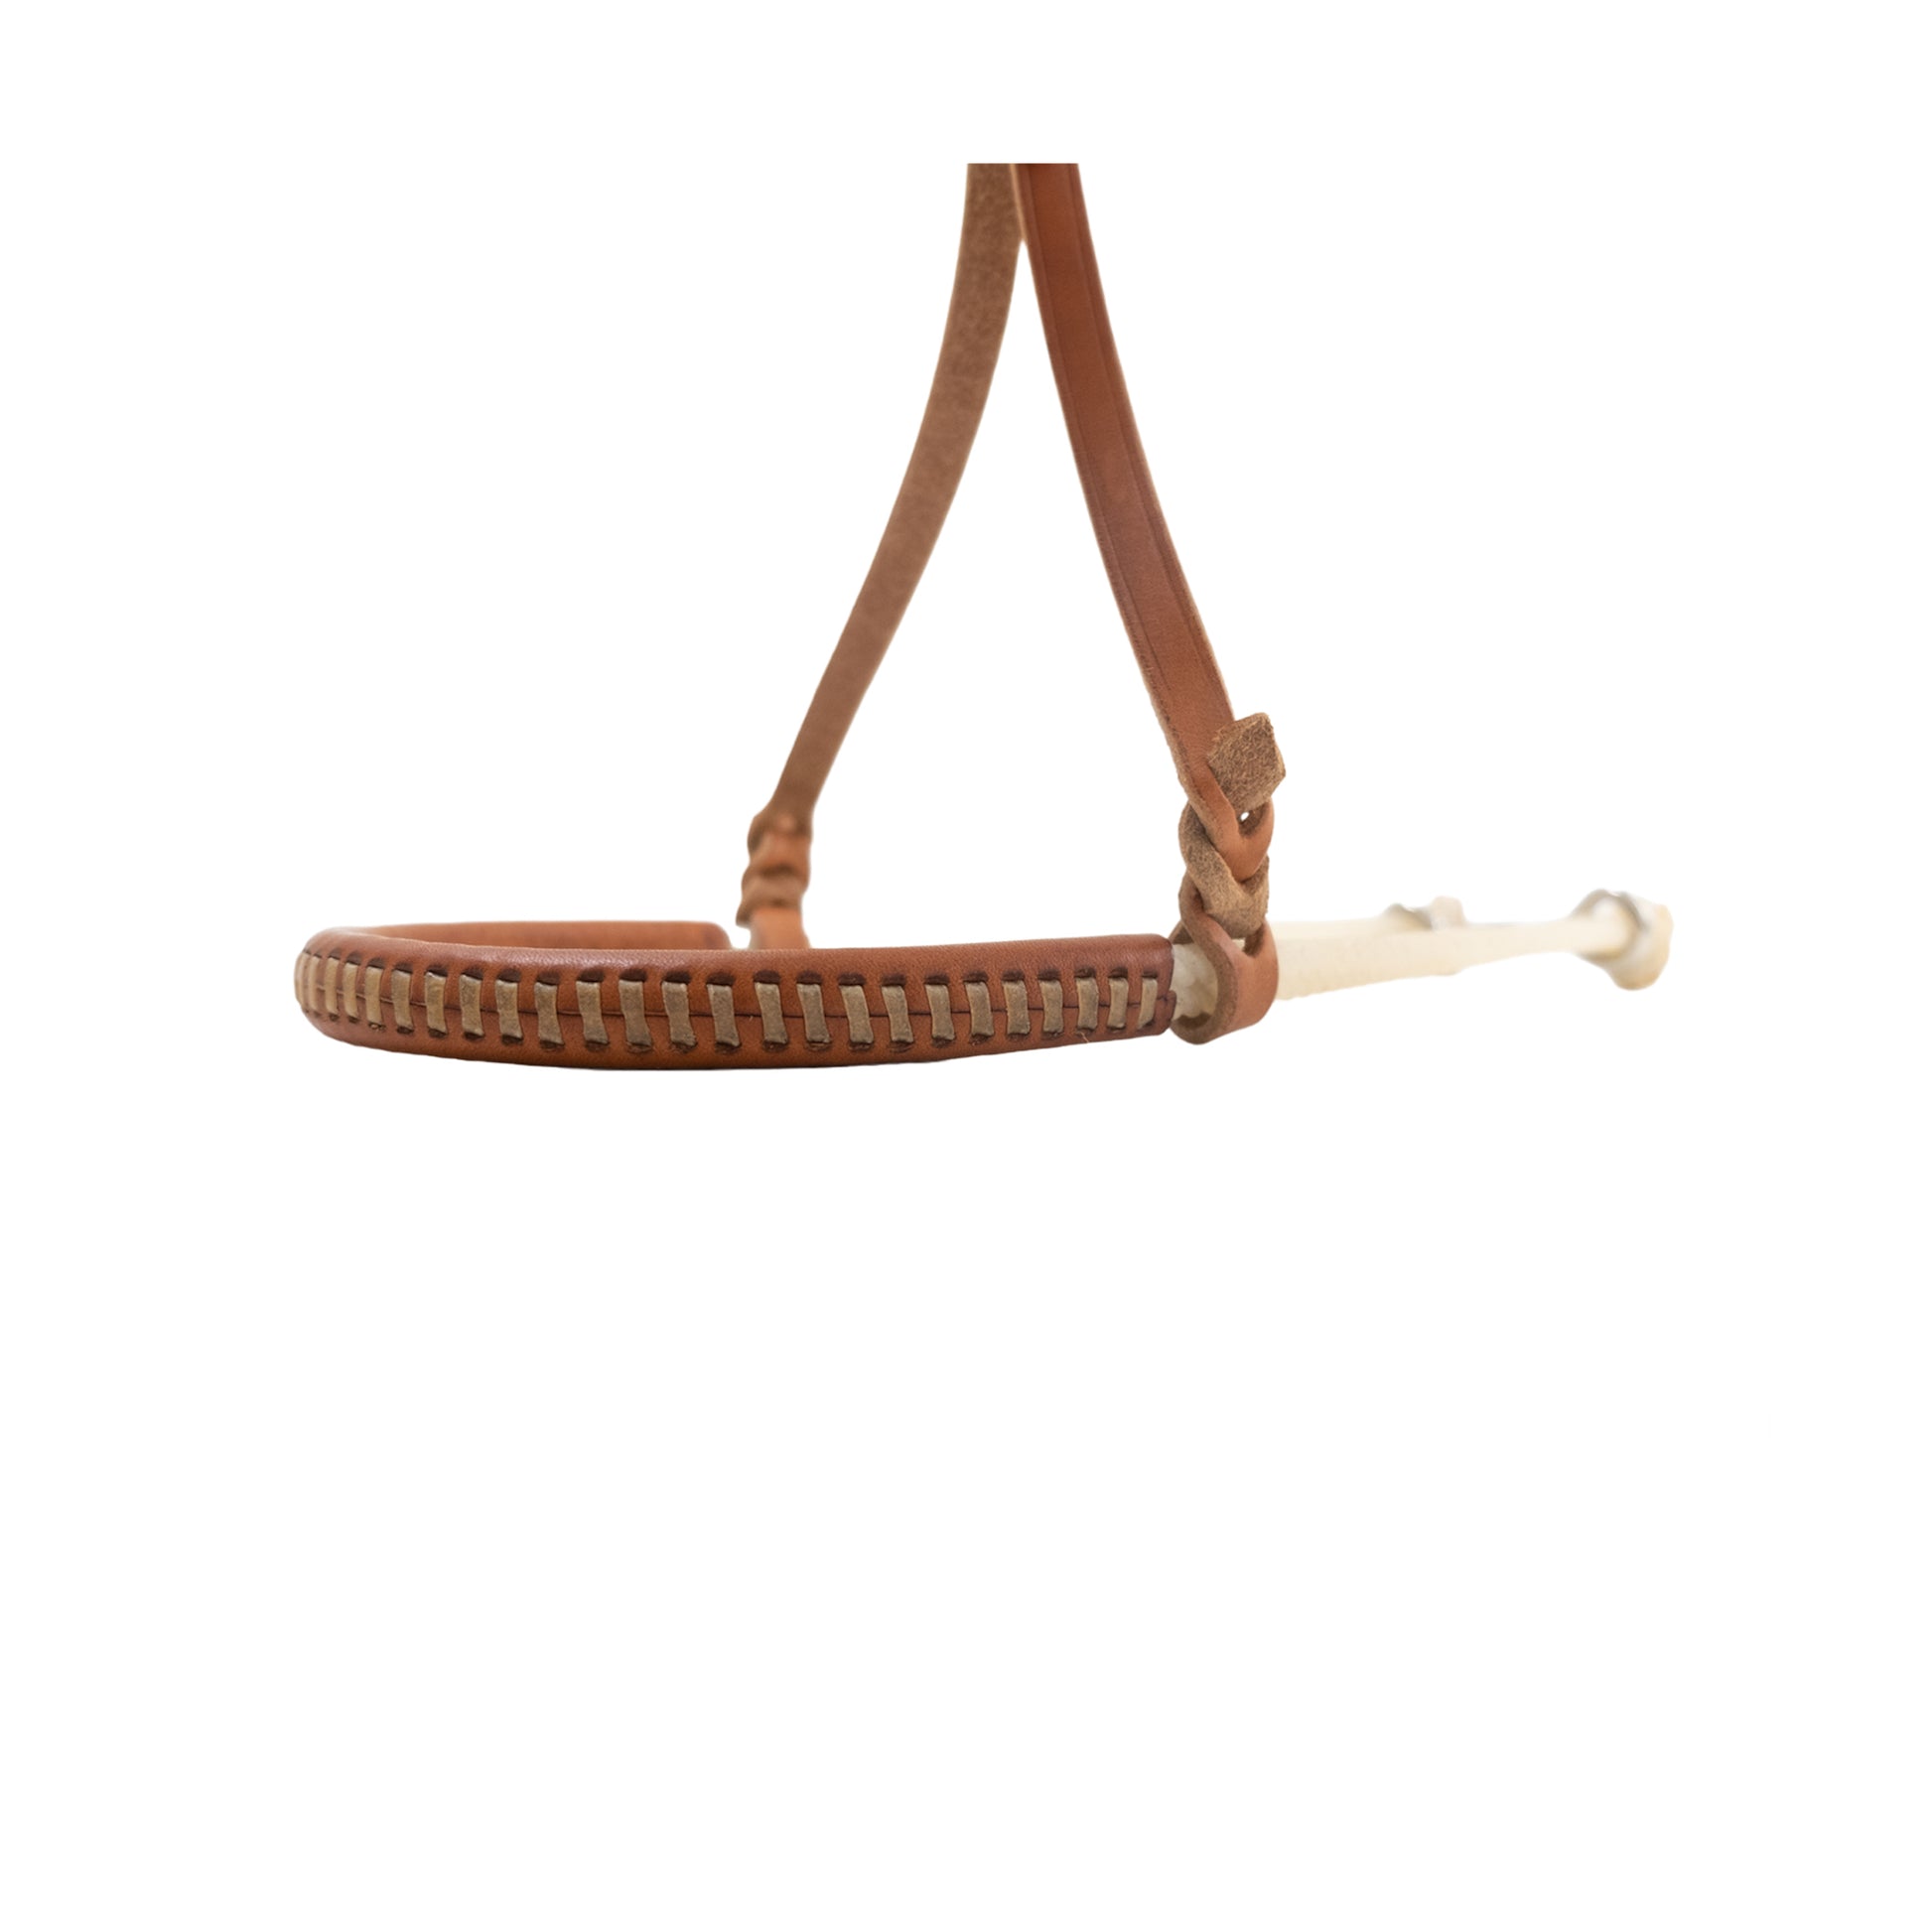 Elite double rope noseband leather covered with rawhide loops and SS hardware.